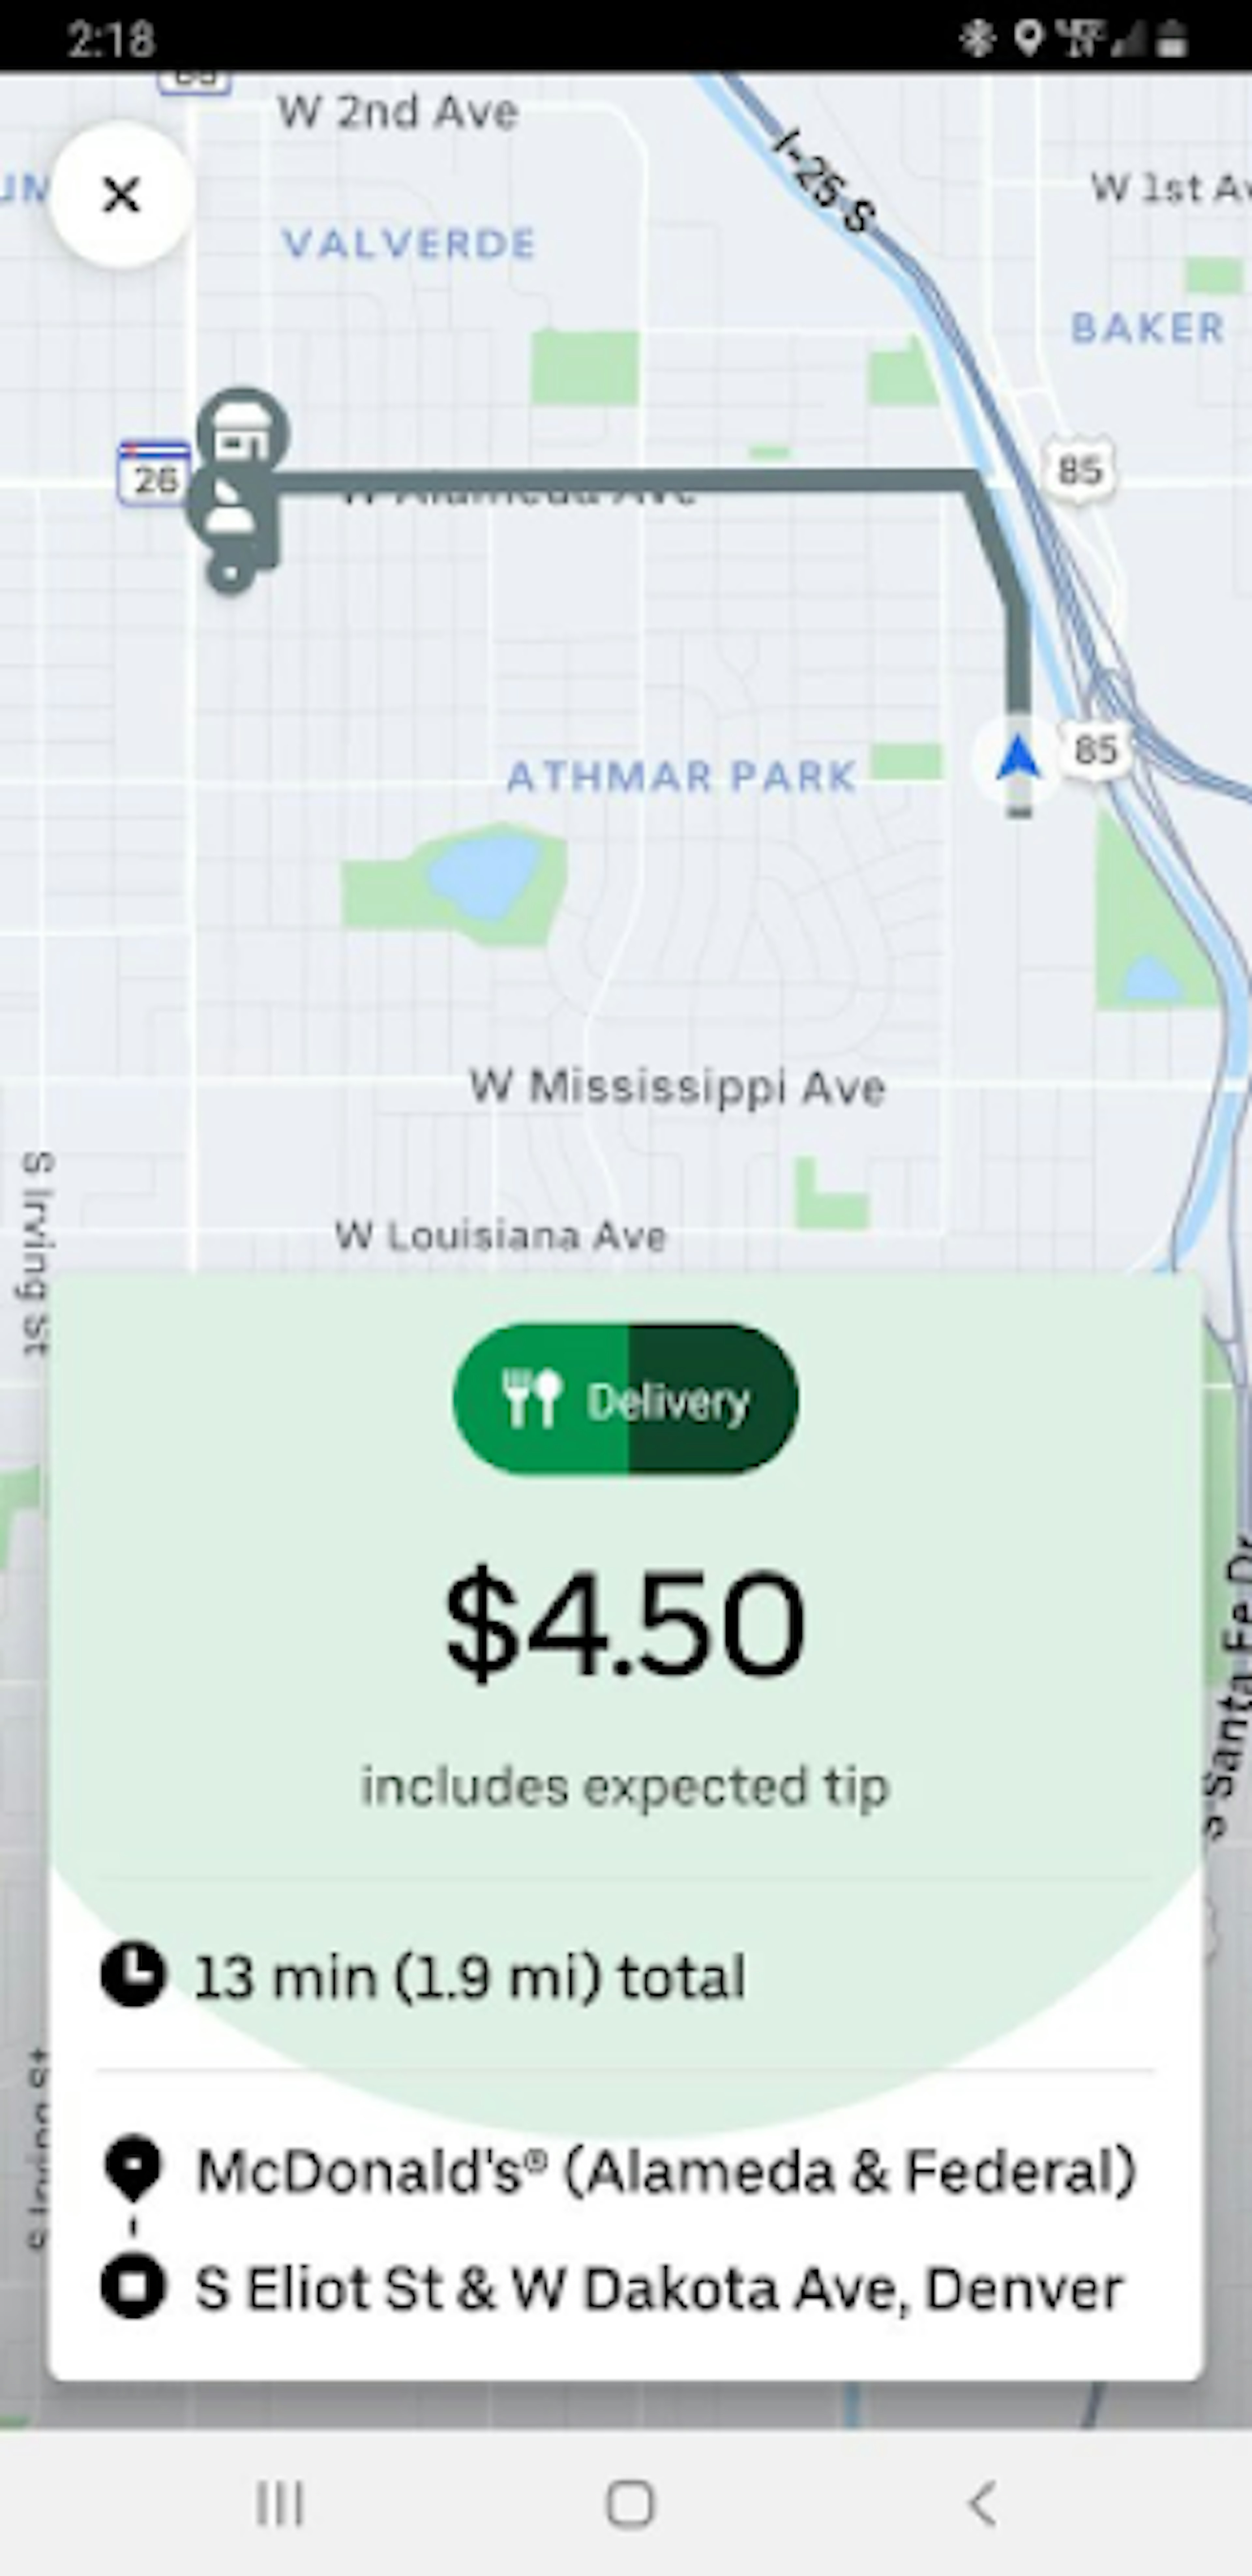 What happens if no driver picks up your Uber Eats order? Will the